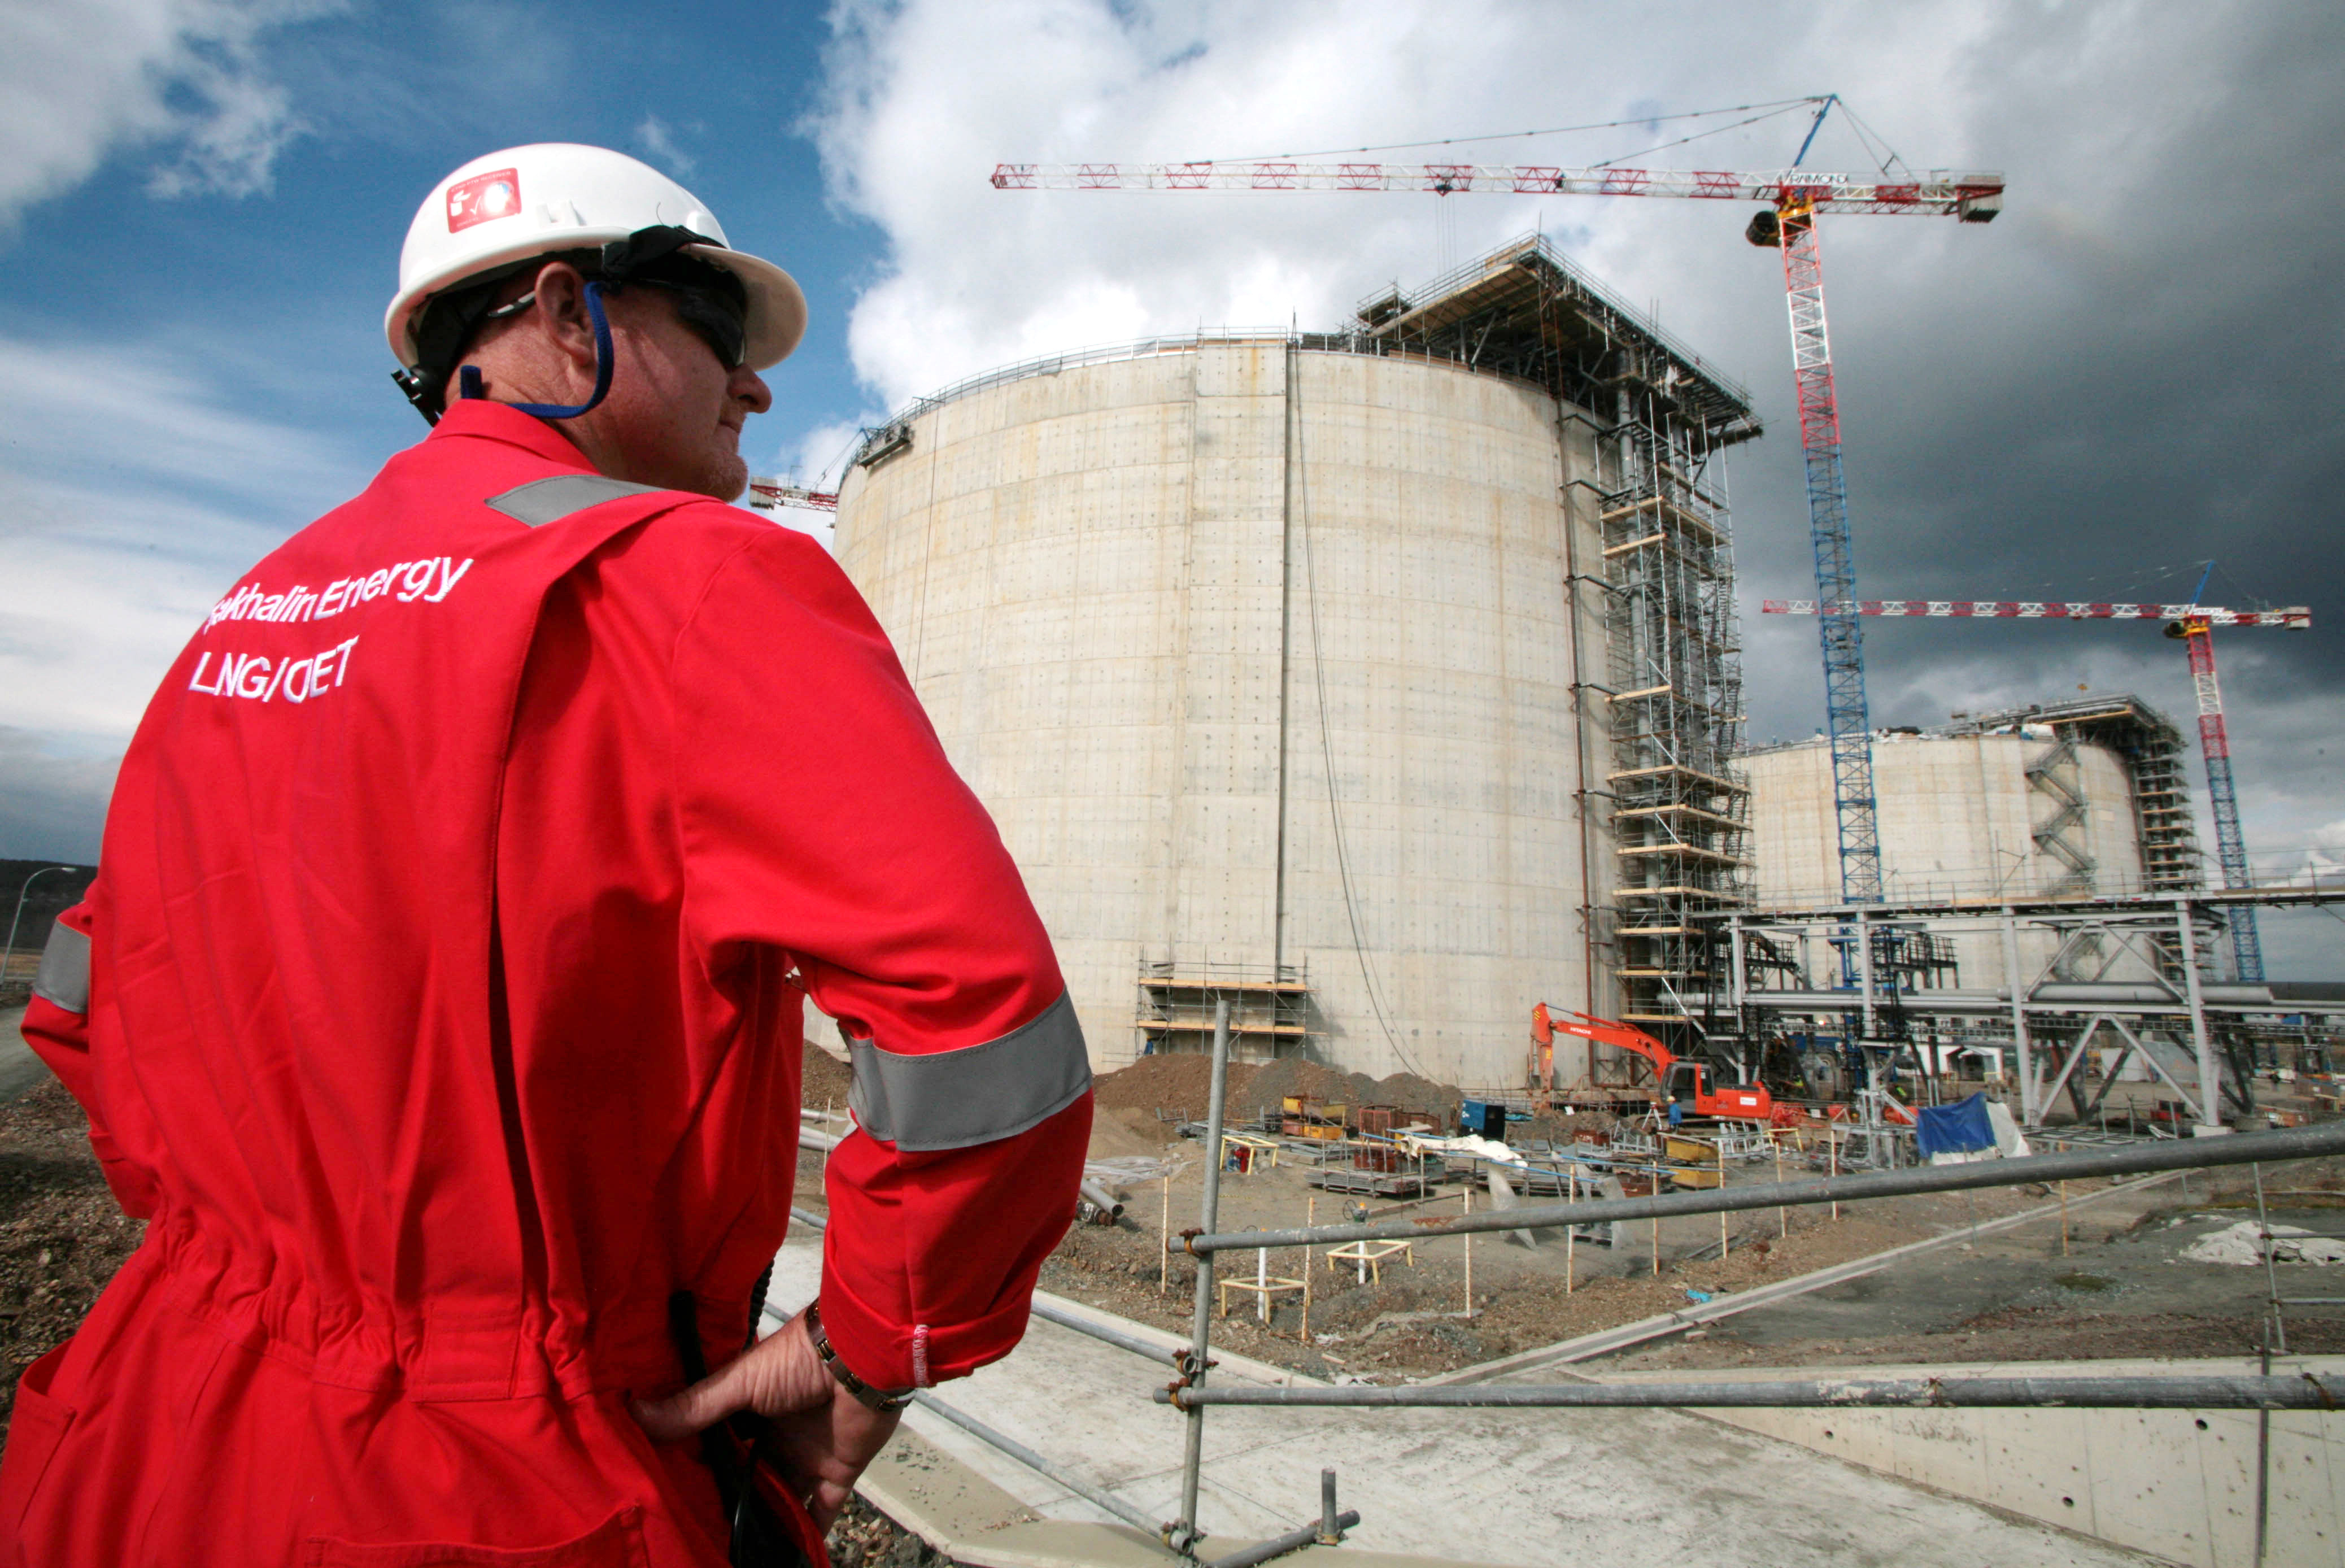 An employee of Sakhalin Energy stands at the Sakhalin-2 project's liquefaction gas plant in Prigorodnoye